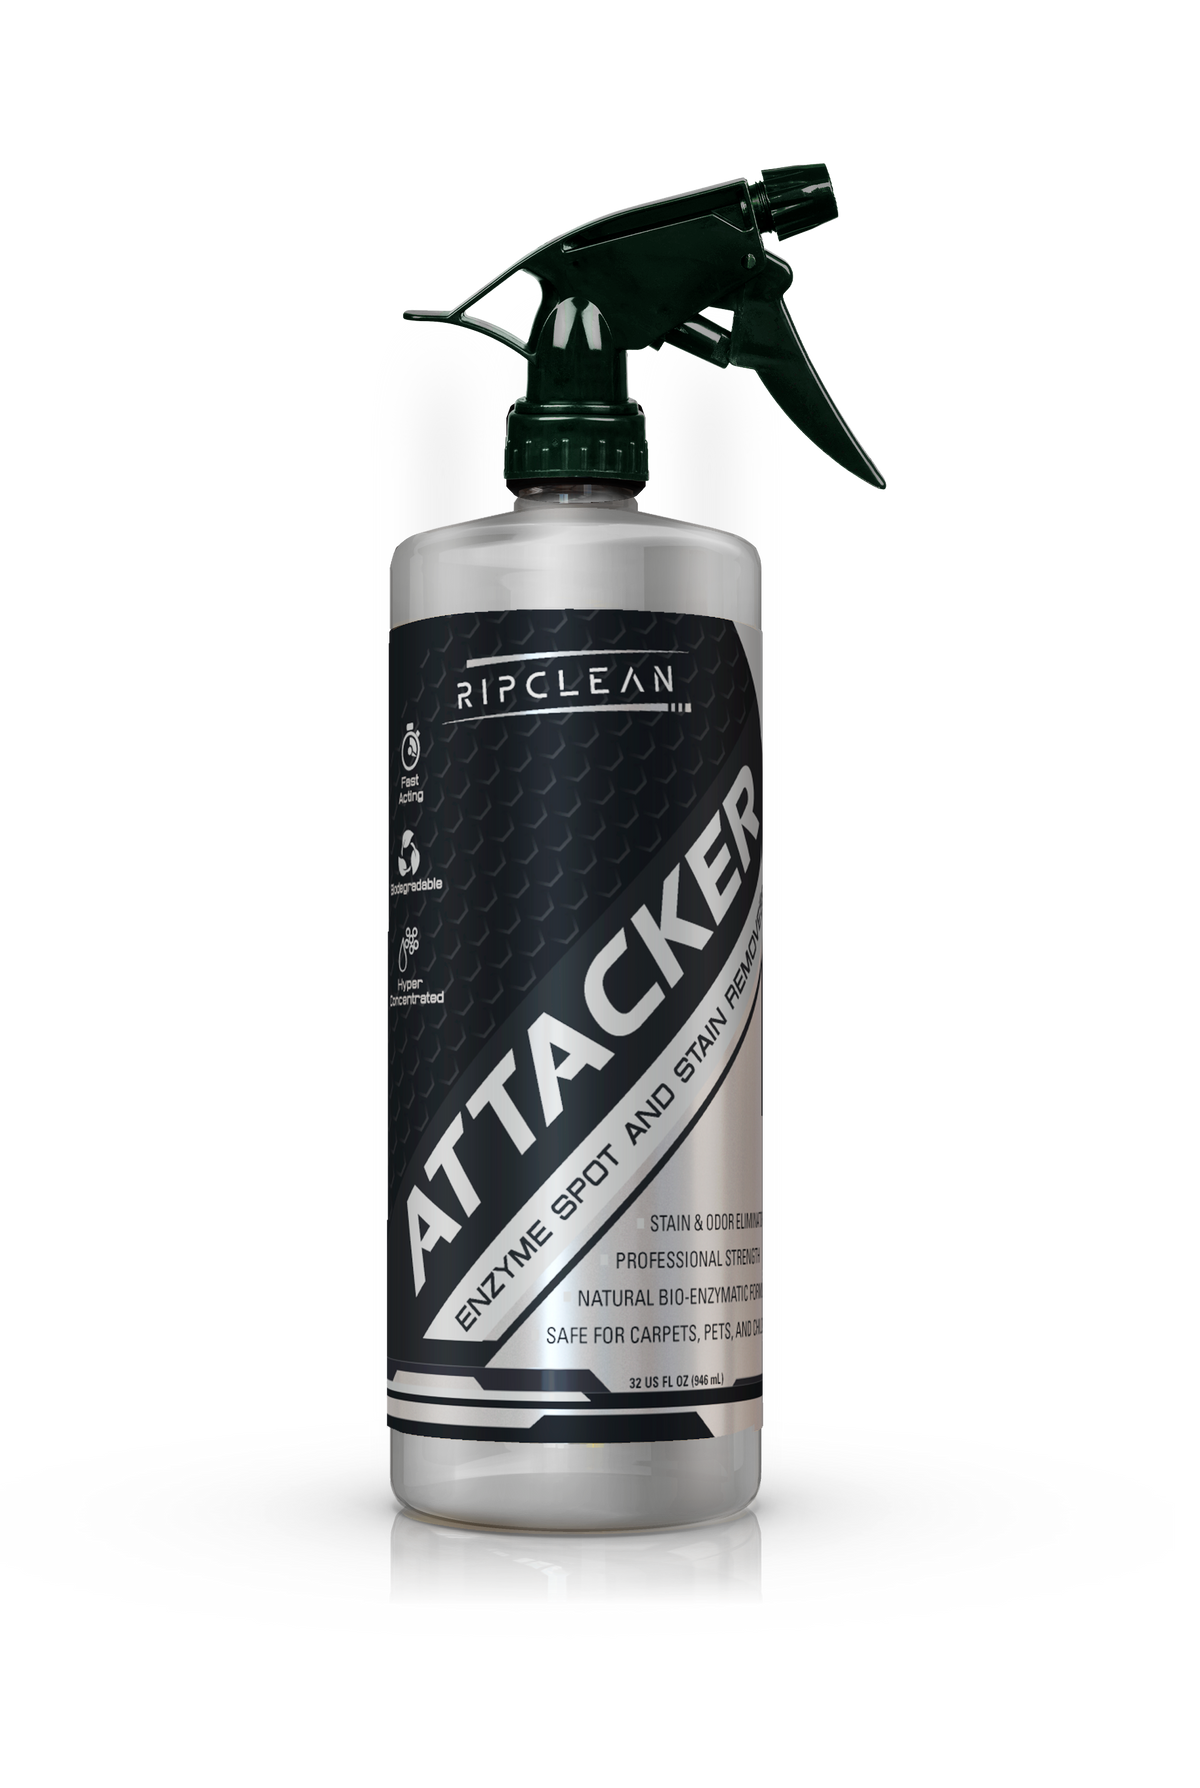 Attacker Enzyme Carpet and Spot Stain Remover